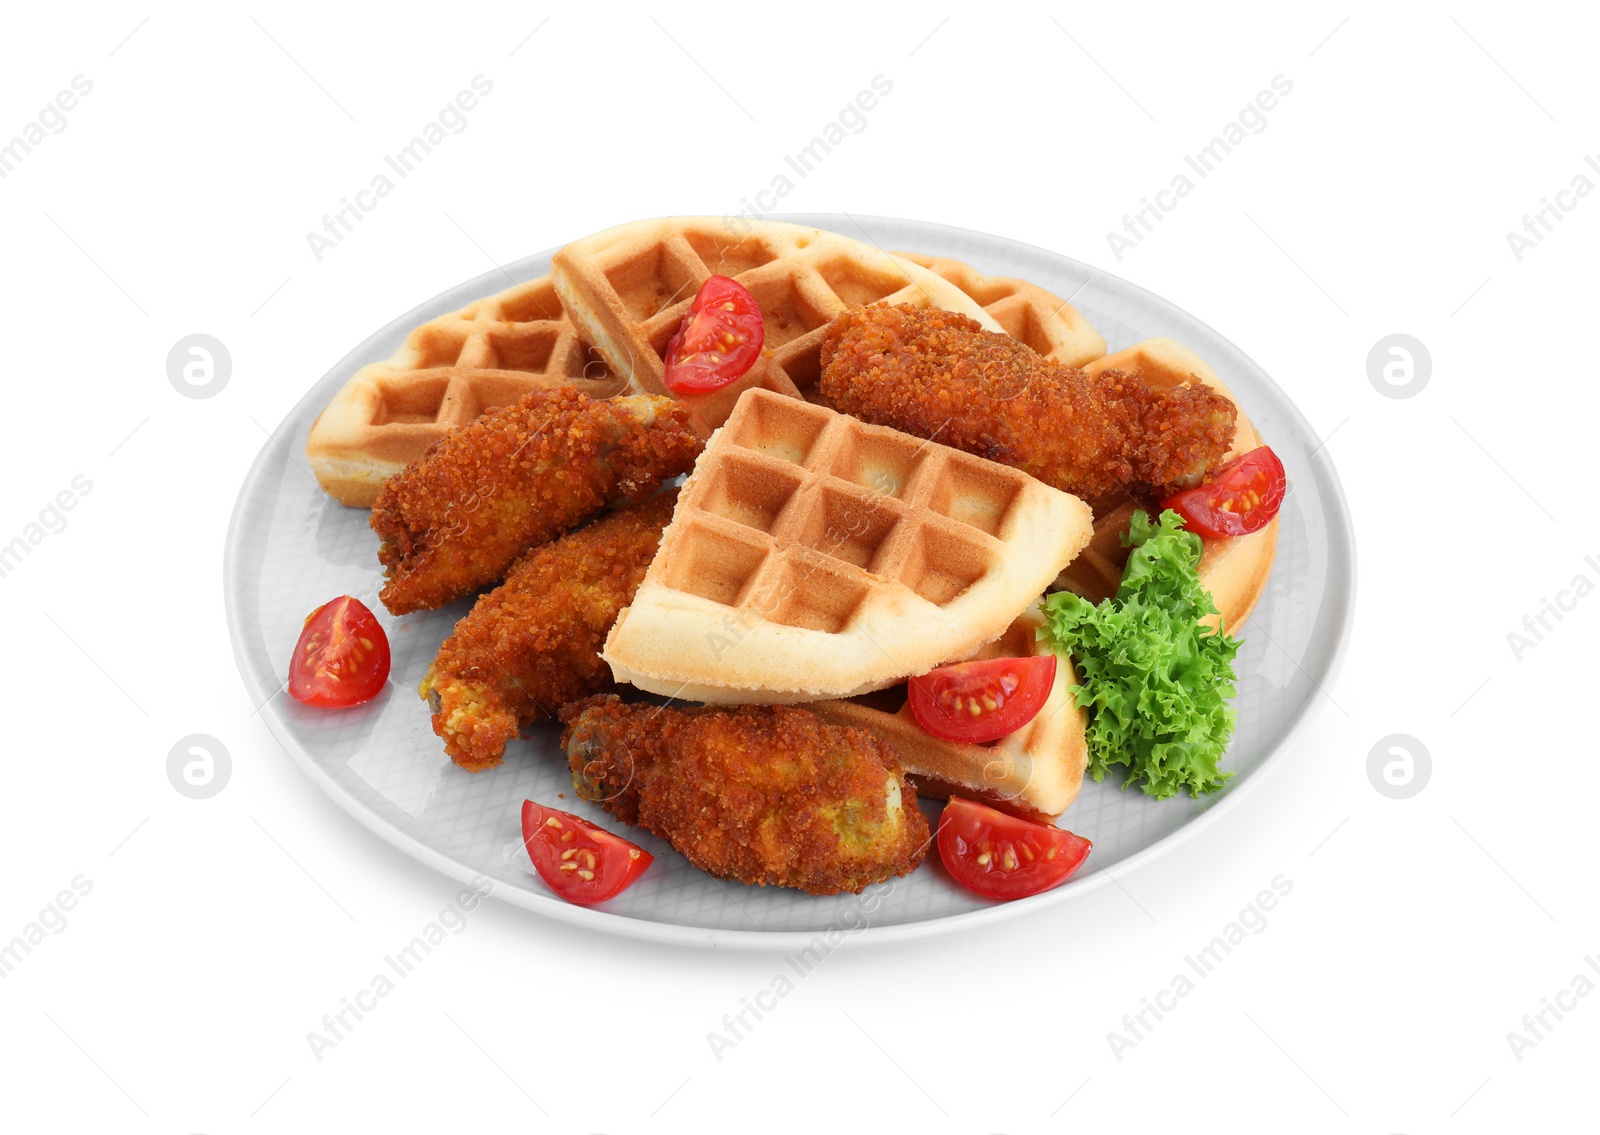 Photo of Plate with tasty Belgian waffles, fried chicken, tomatoes and lettuce isolated on white